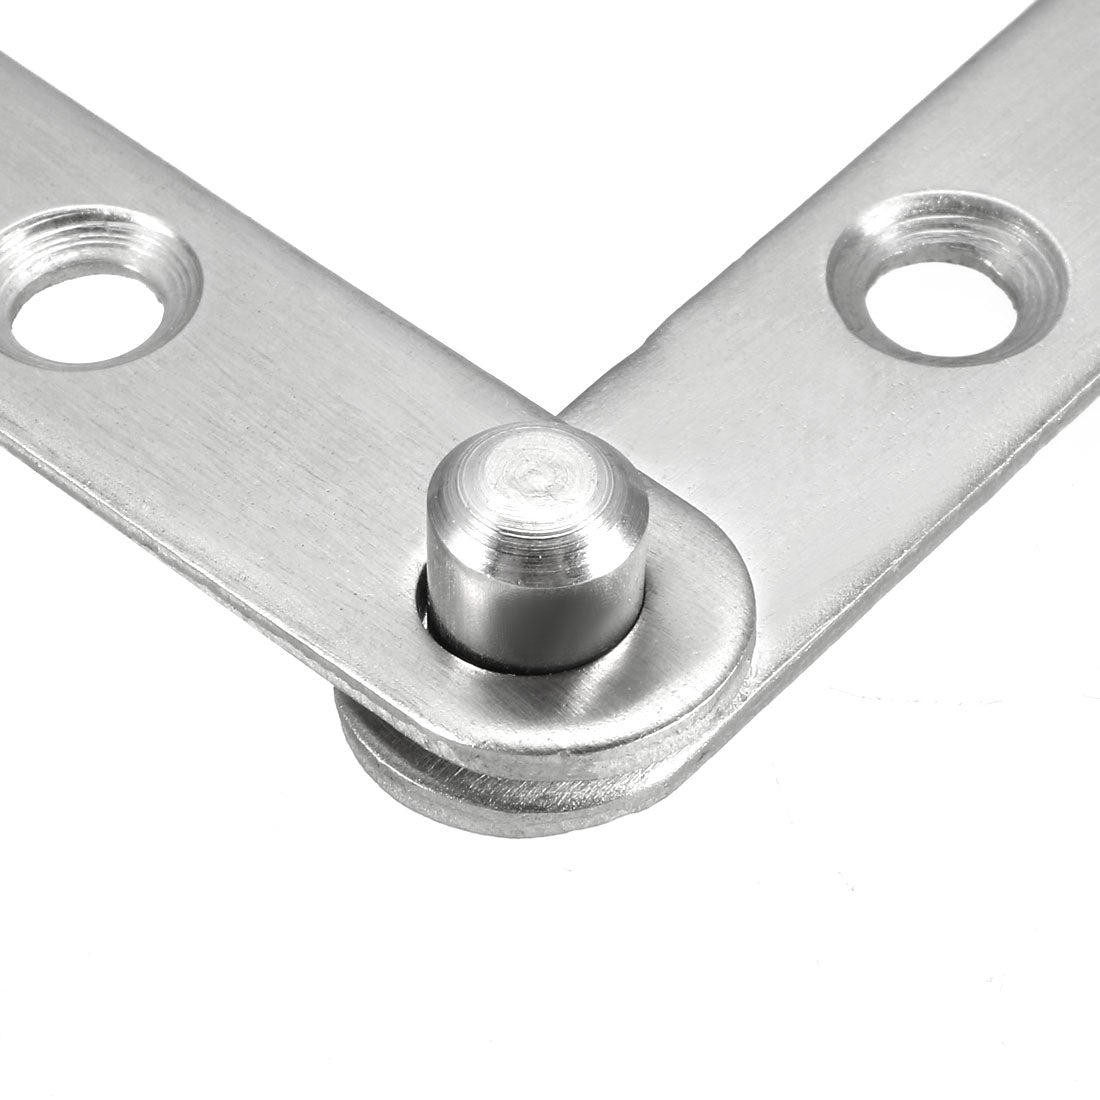 uxcell Uxcell Door Pivot Hinge, 58mmx11mmx9mm Stainless Steel 360 Degree Rotating 4pcs